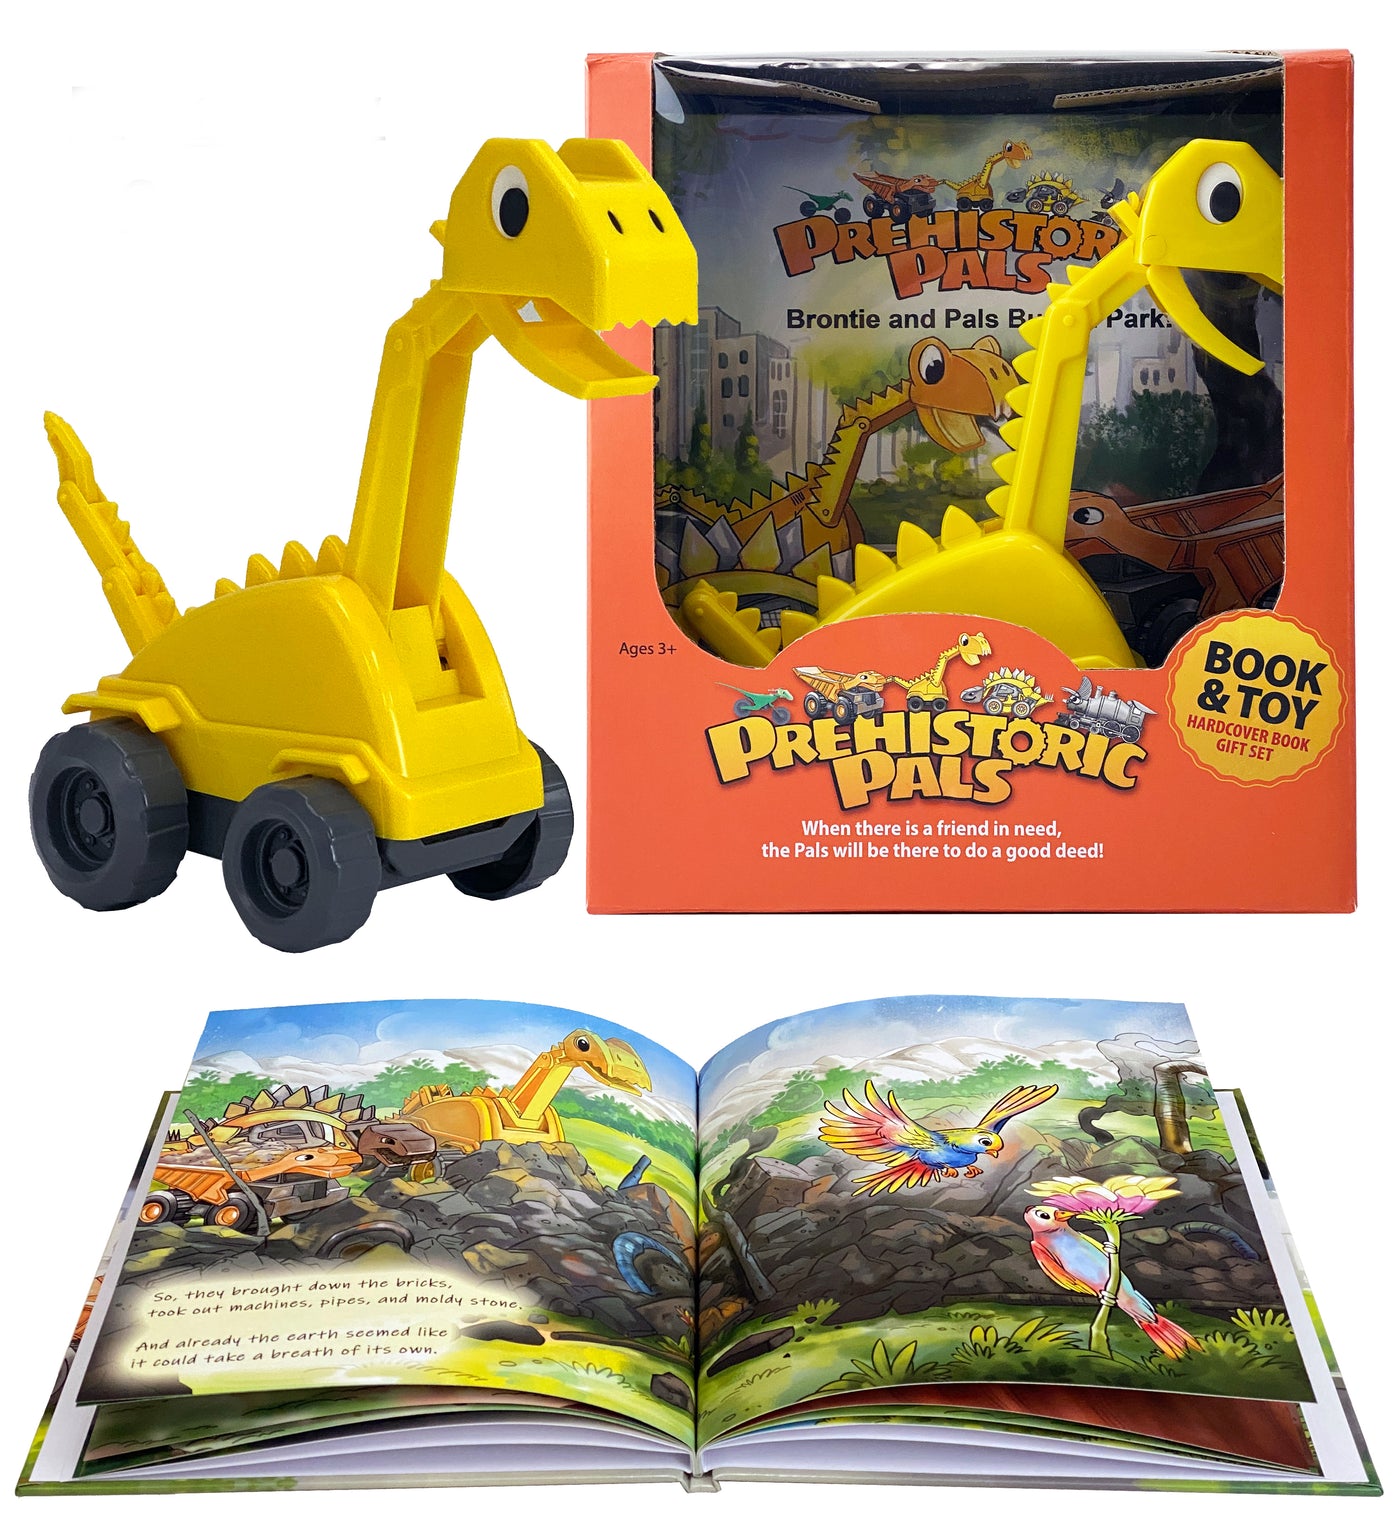 Dinosaur Book and Toy Gift Set | Brontie and Pals Build a Park